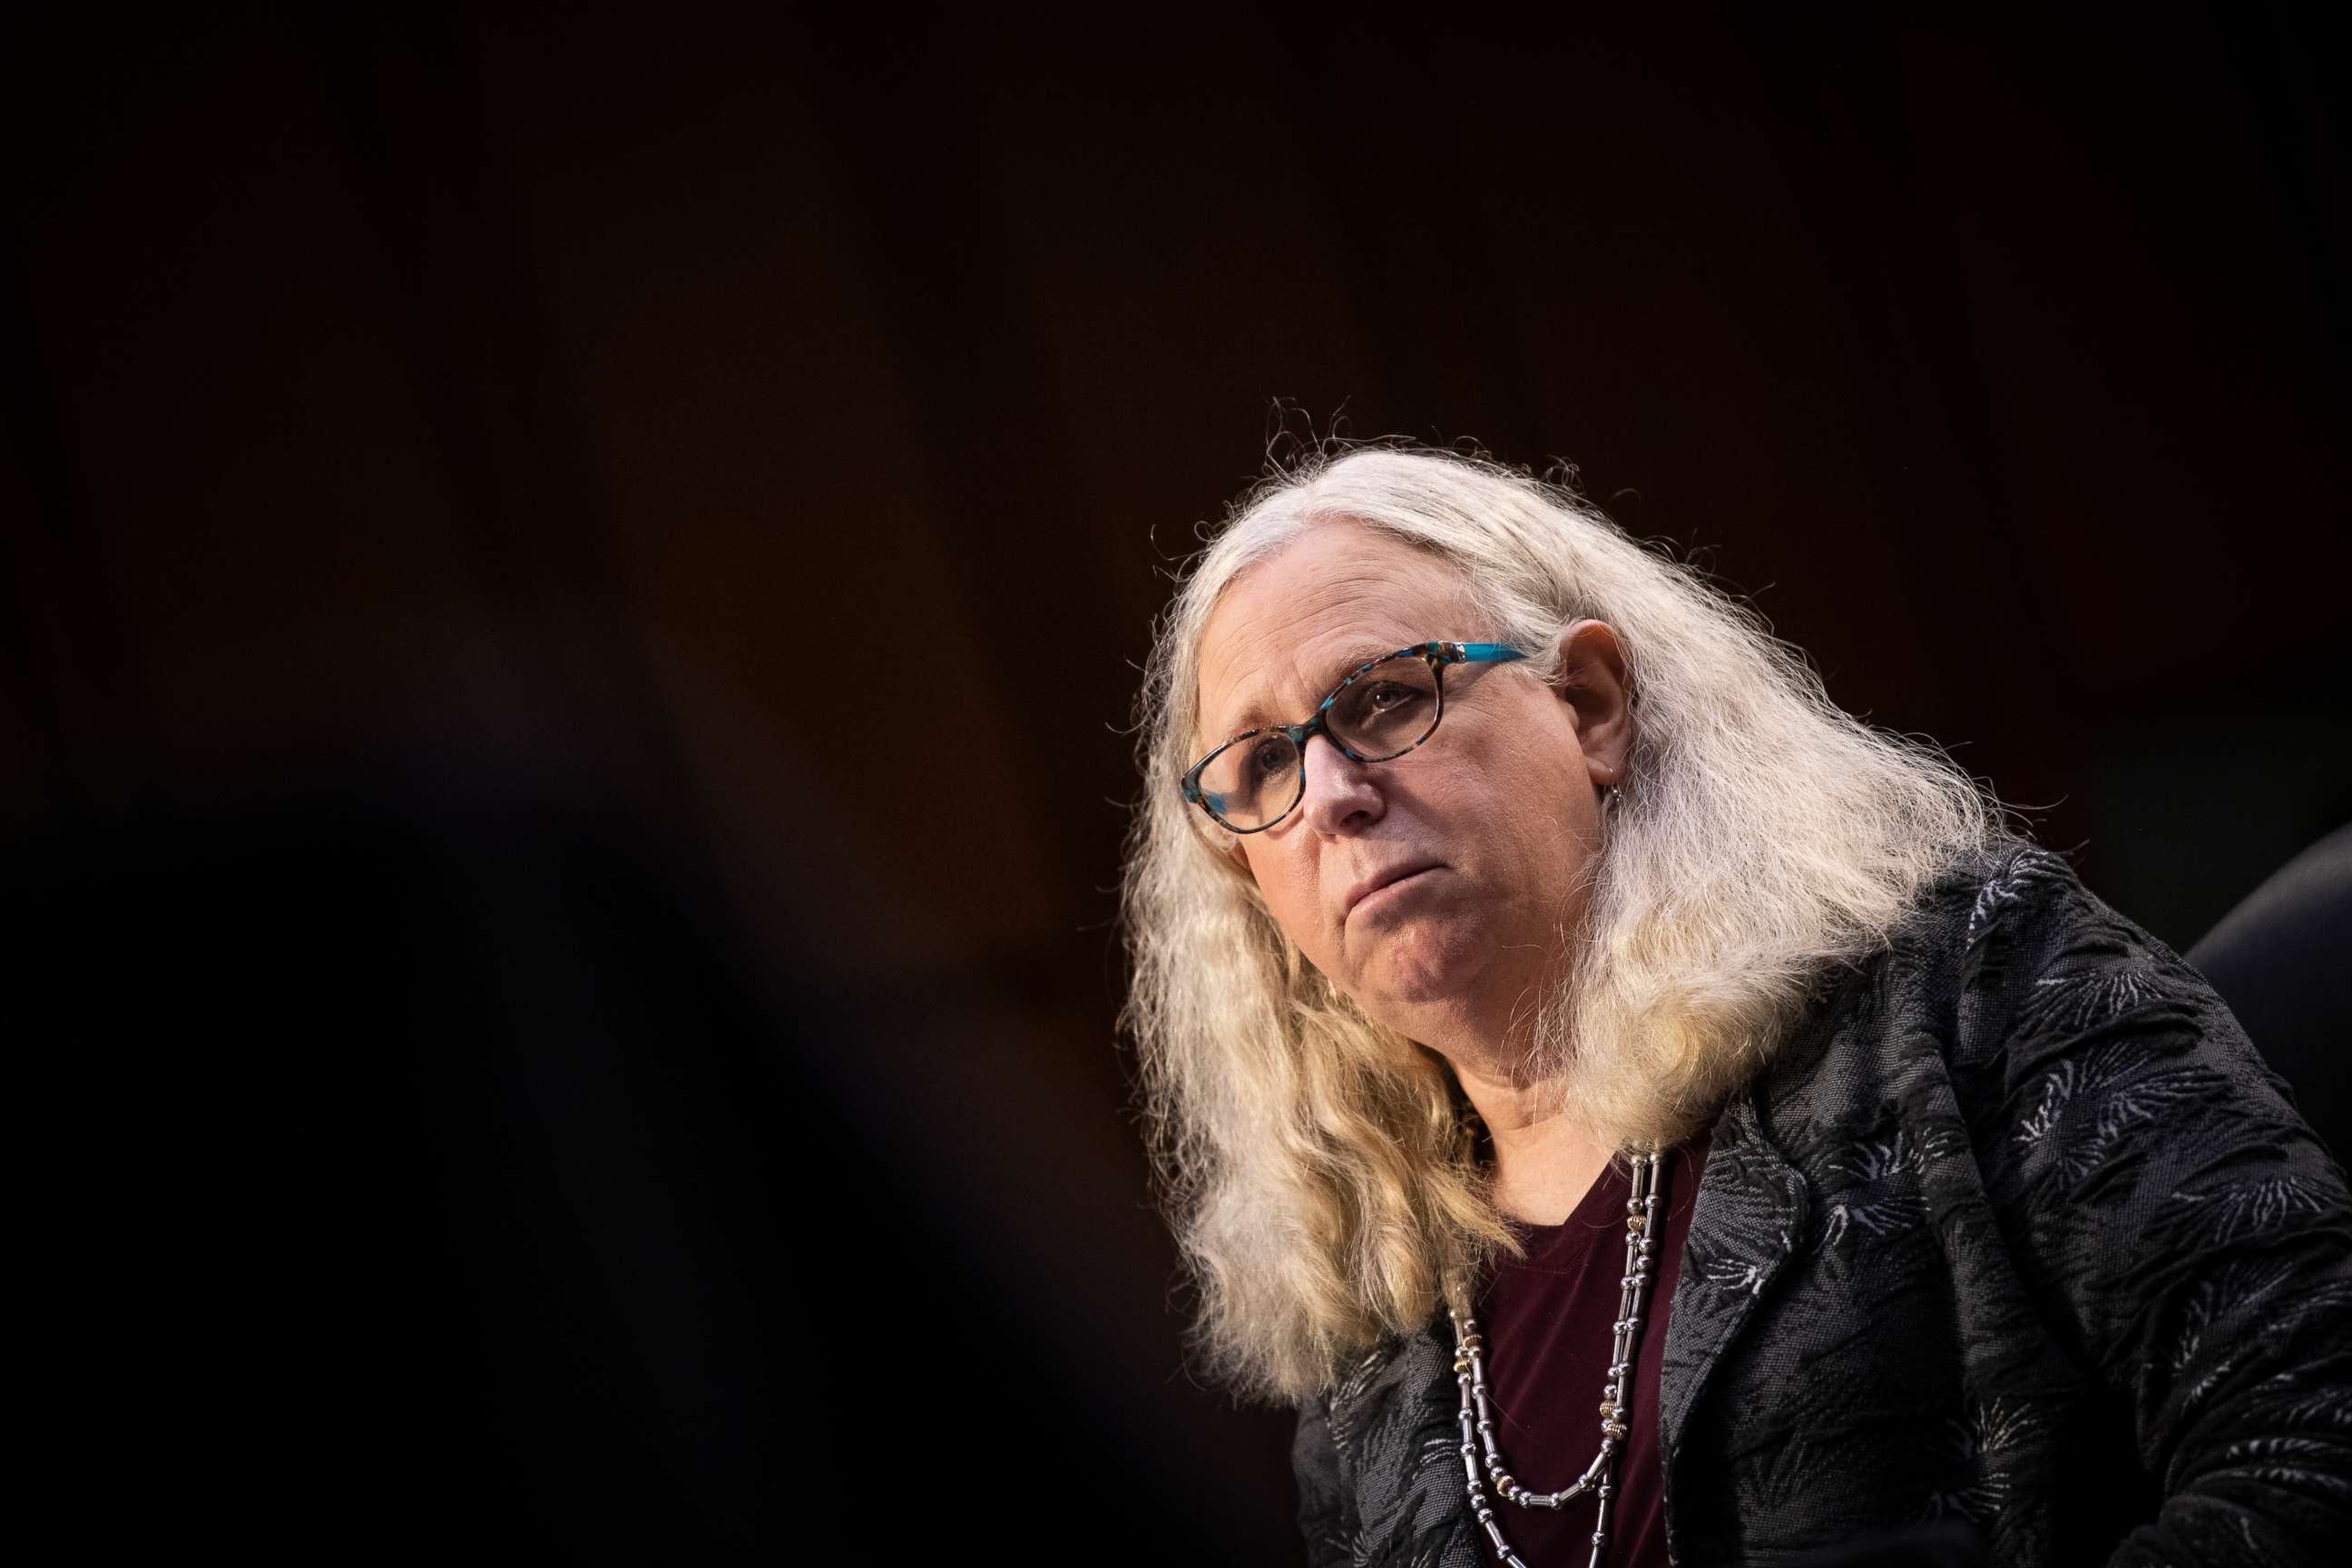 PHOTO: Dr. Rachel Levine, nominee for Assistant Secretary in the Department of Health and Human Services testifies at her confirmation hearing before the Senate Health, Education, Labor, and Pensions Committee, Feb. 25, 2021, in Washington D.C.